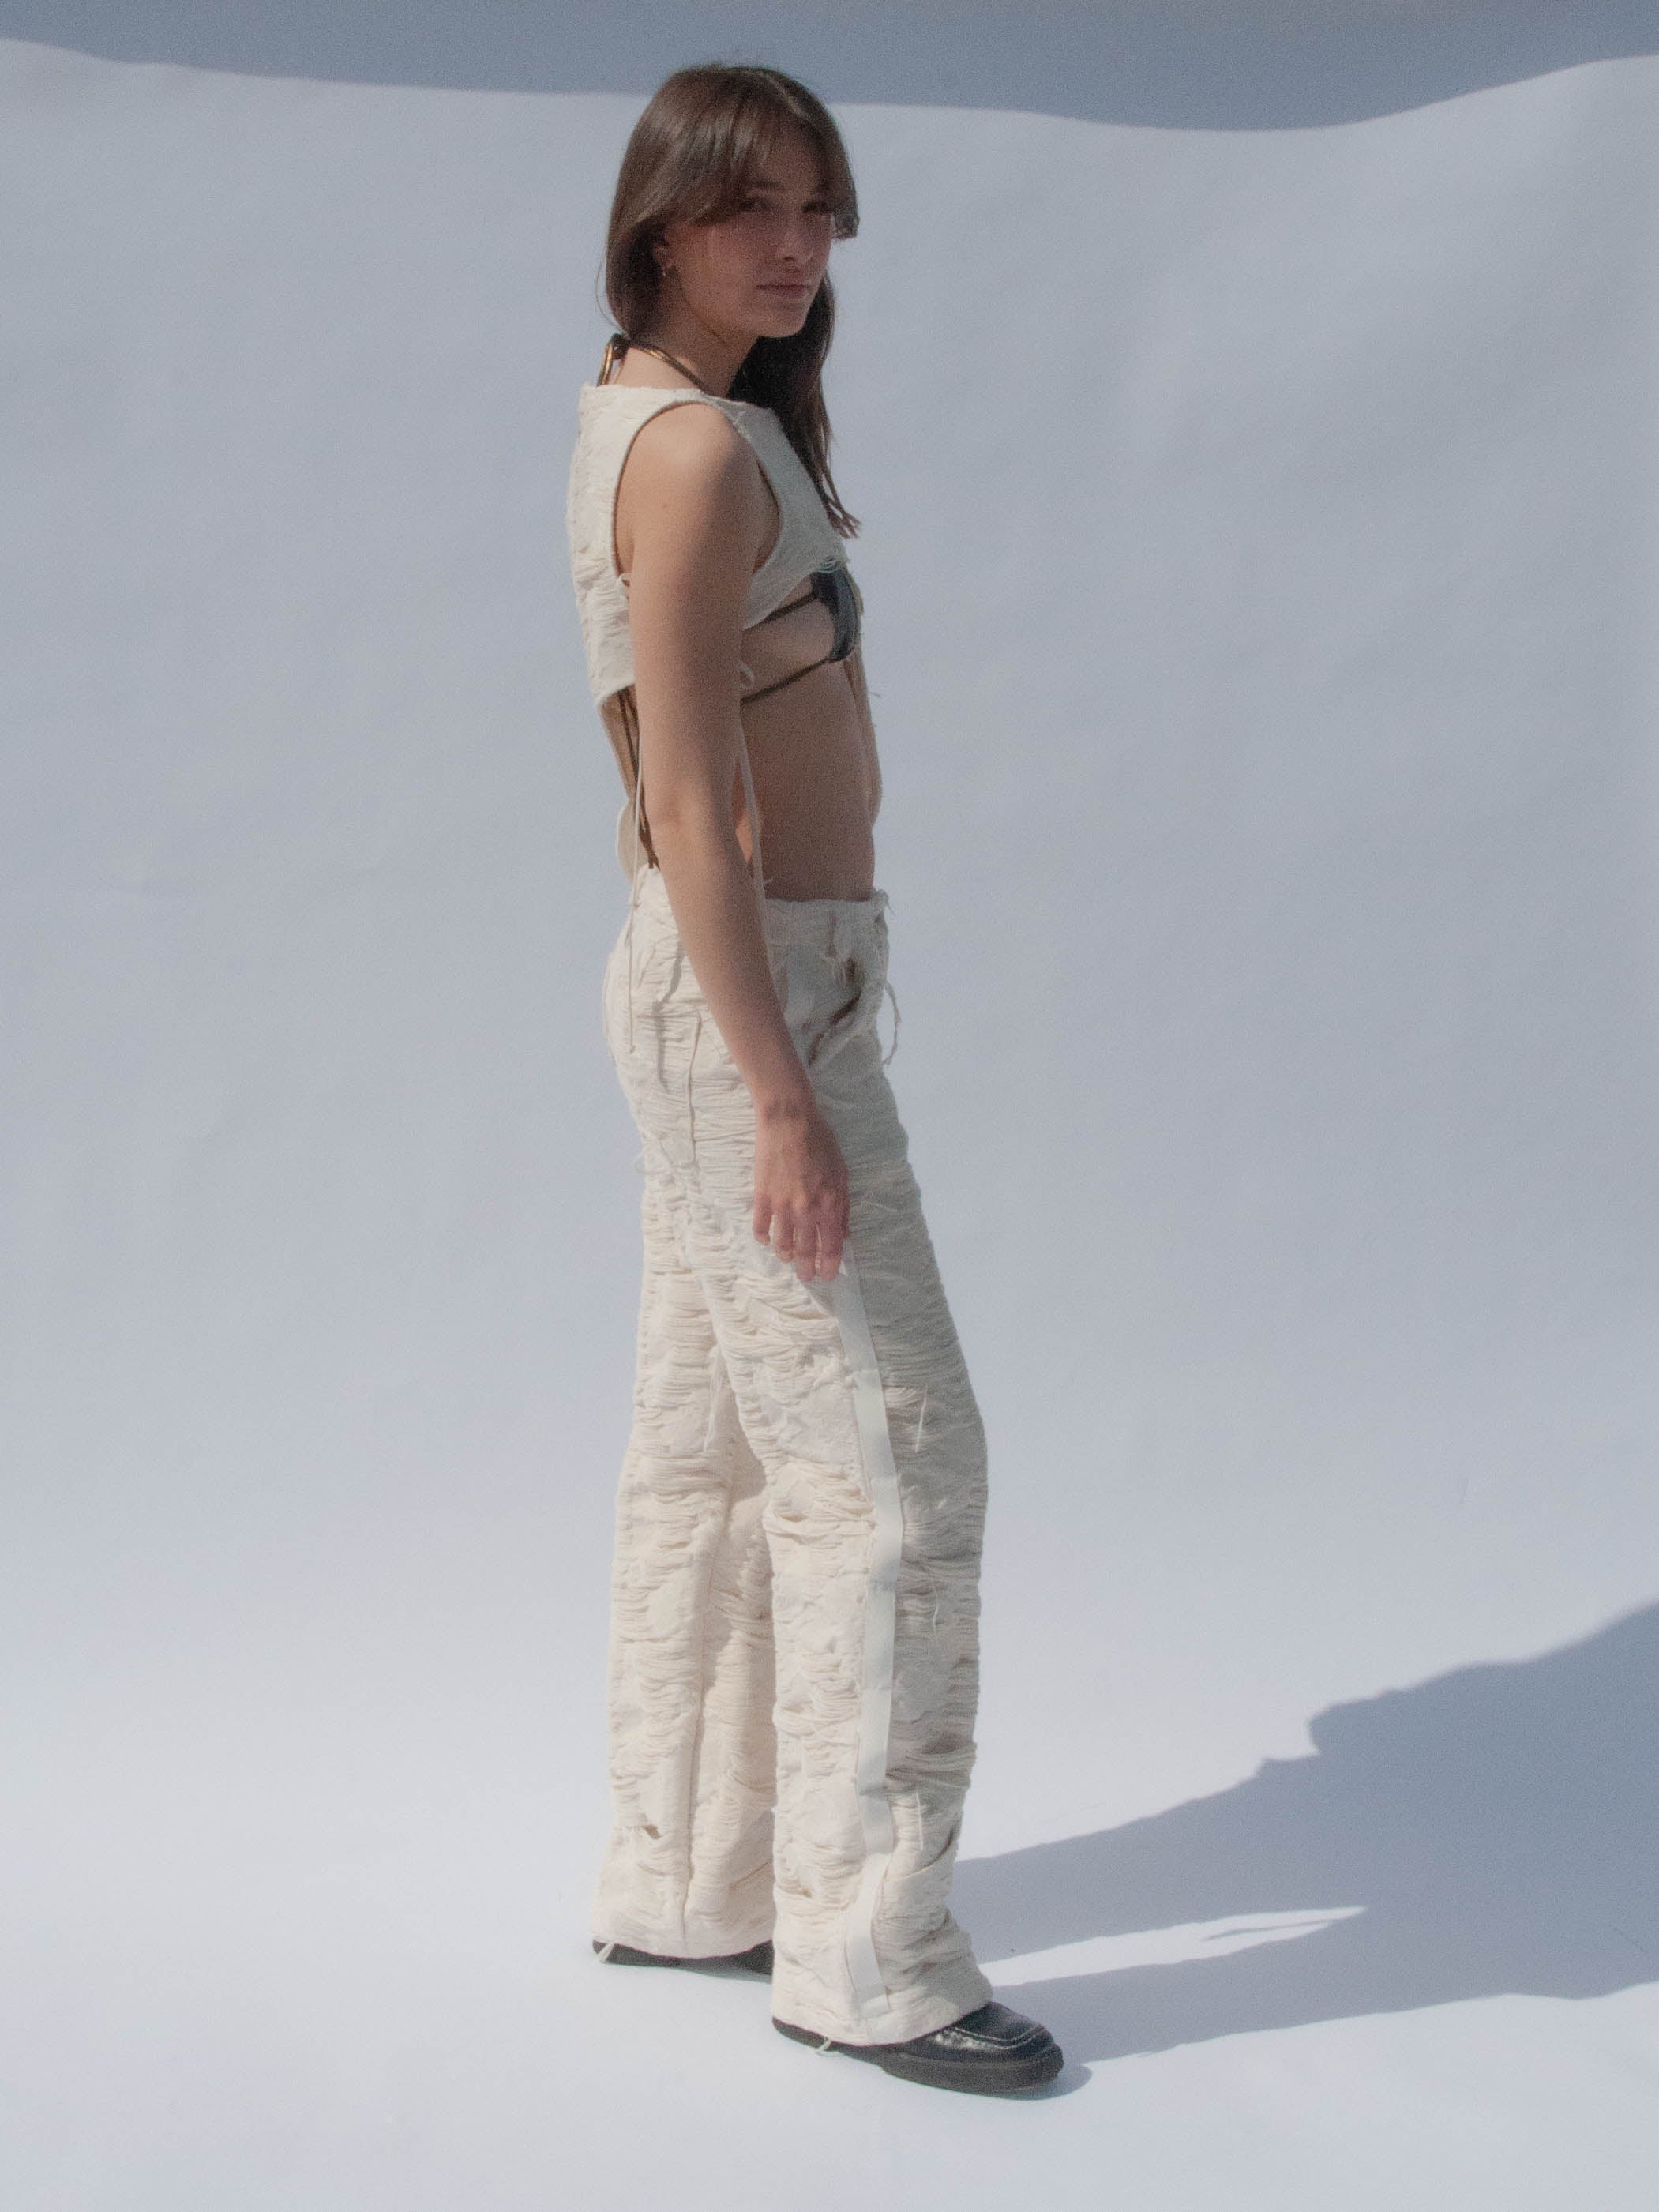 Top, side view, deconstructed, asymmetrical cut, upcycled